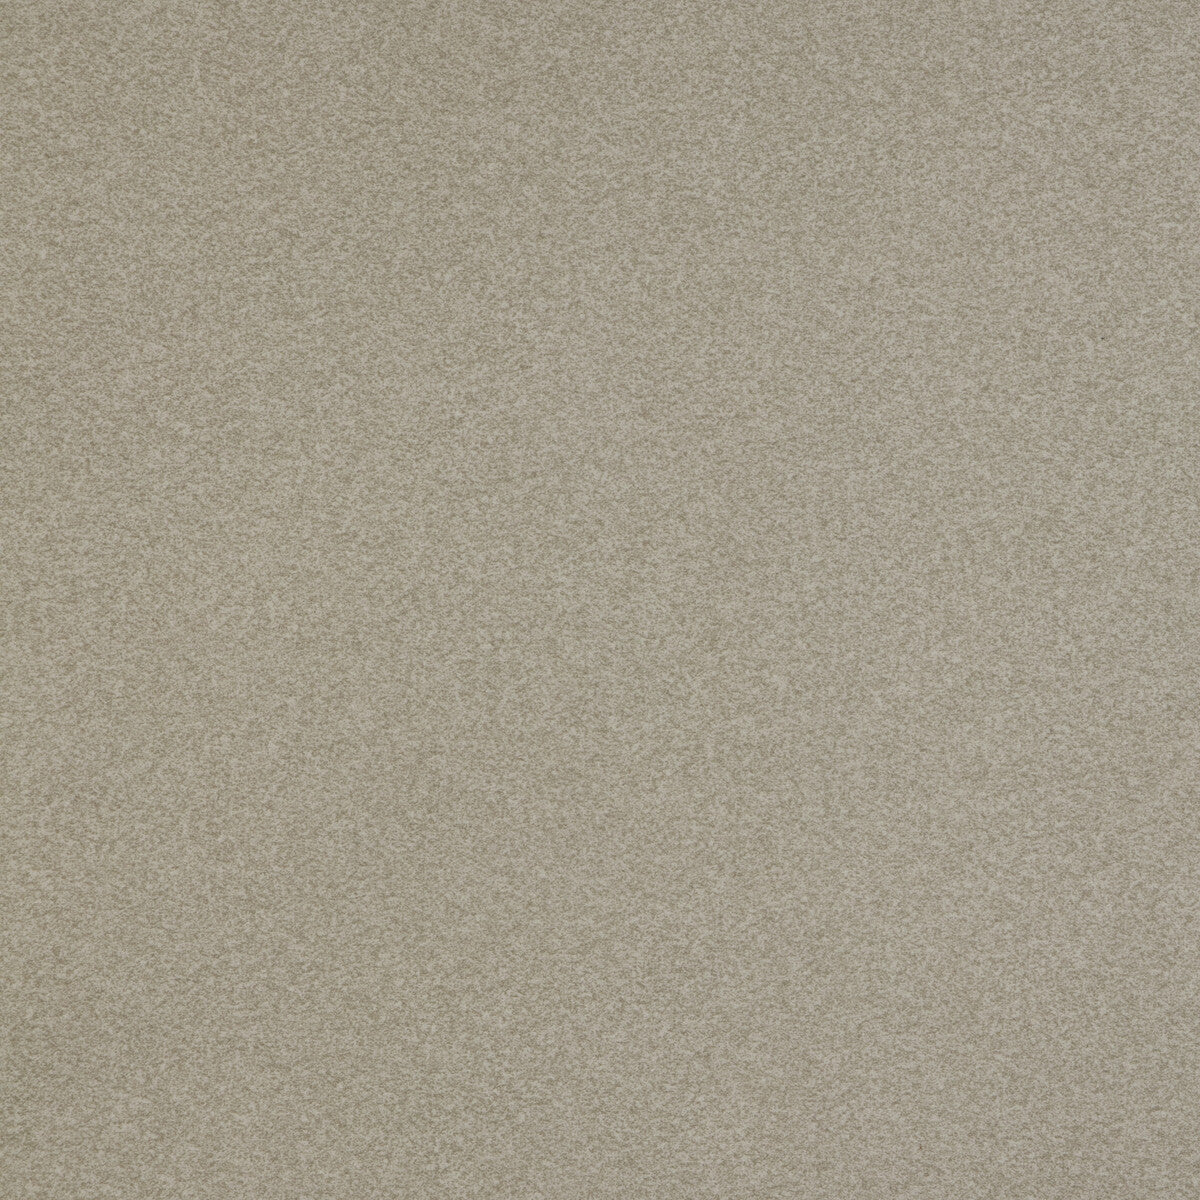 Heathered fabric in sand color - pattern HEATHERED.106.0 - by Kravet Design in the Performance collection